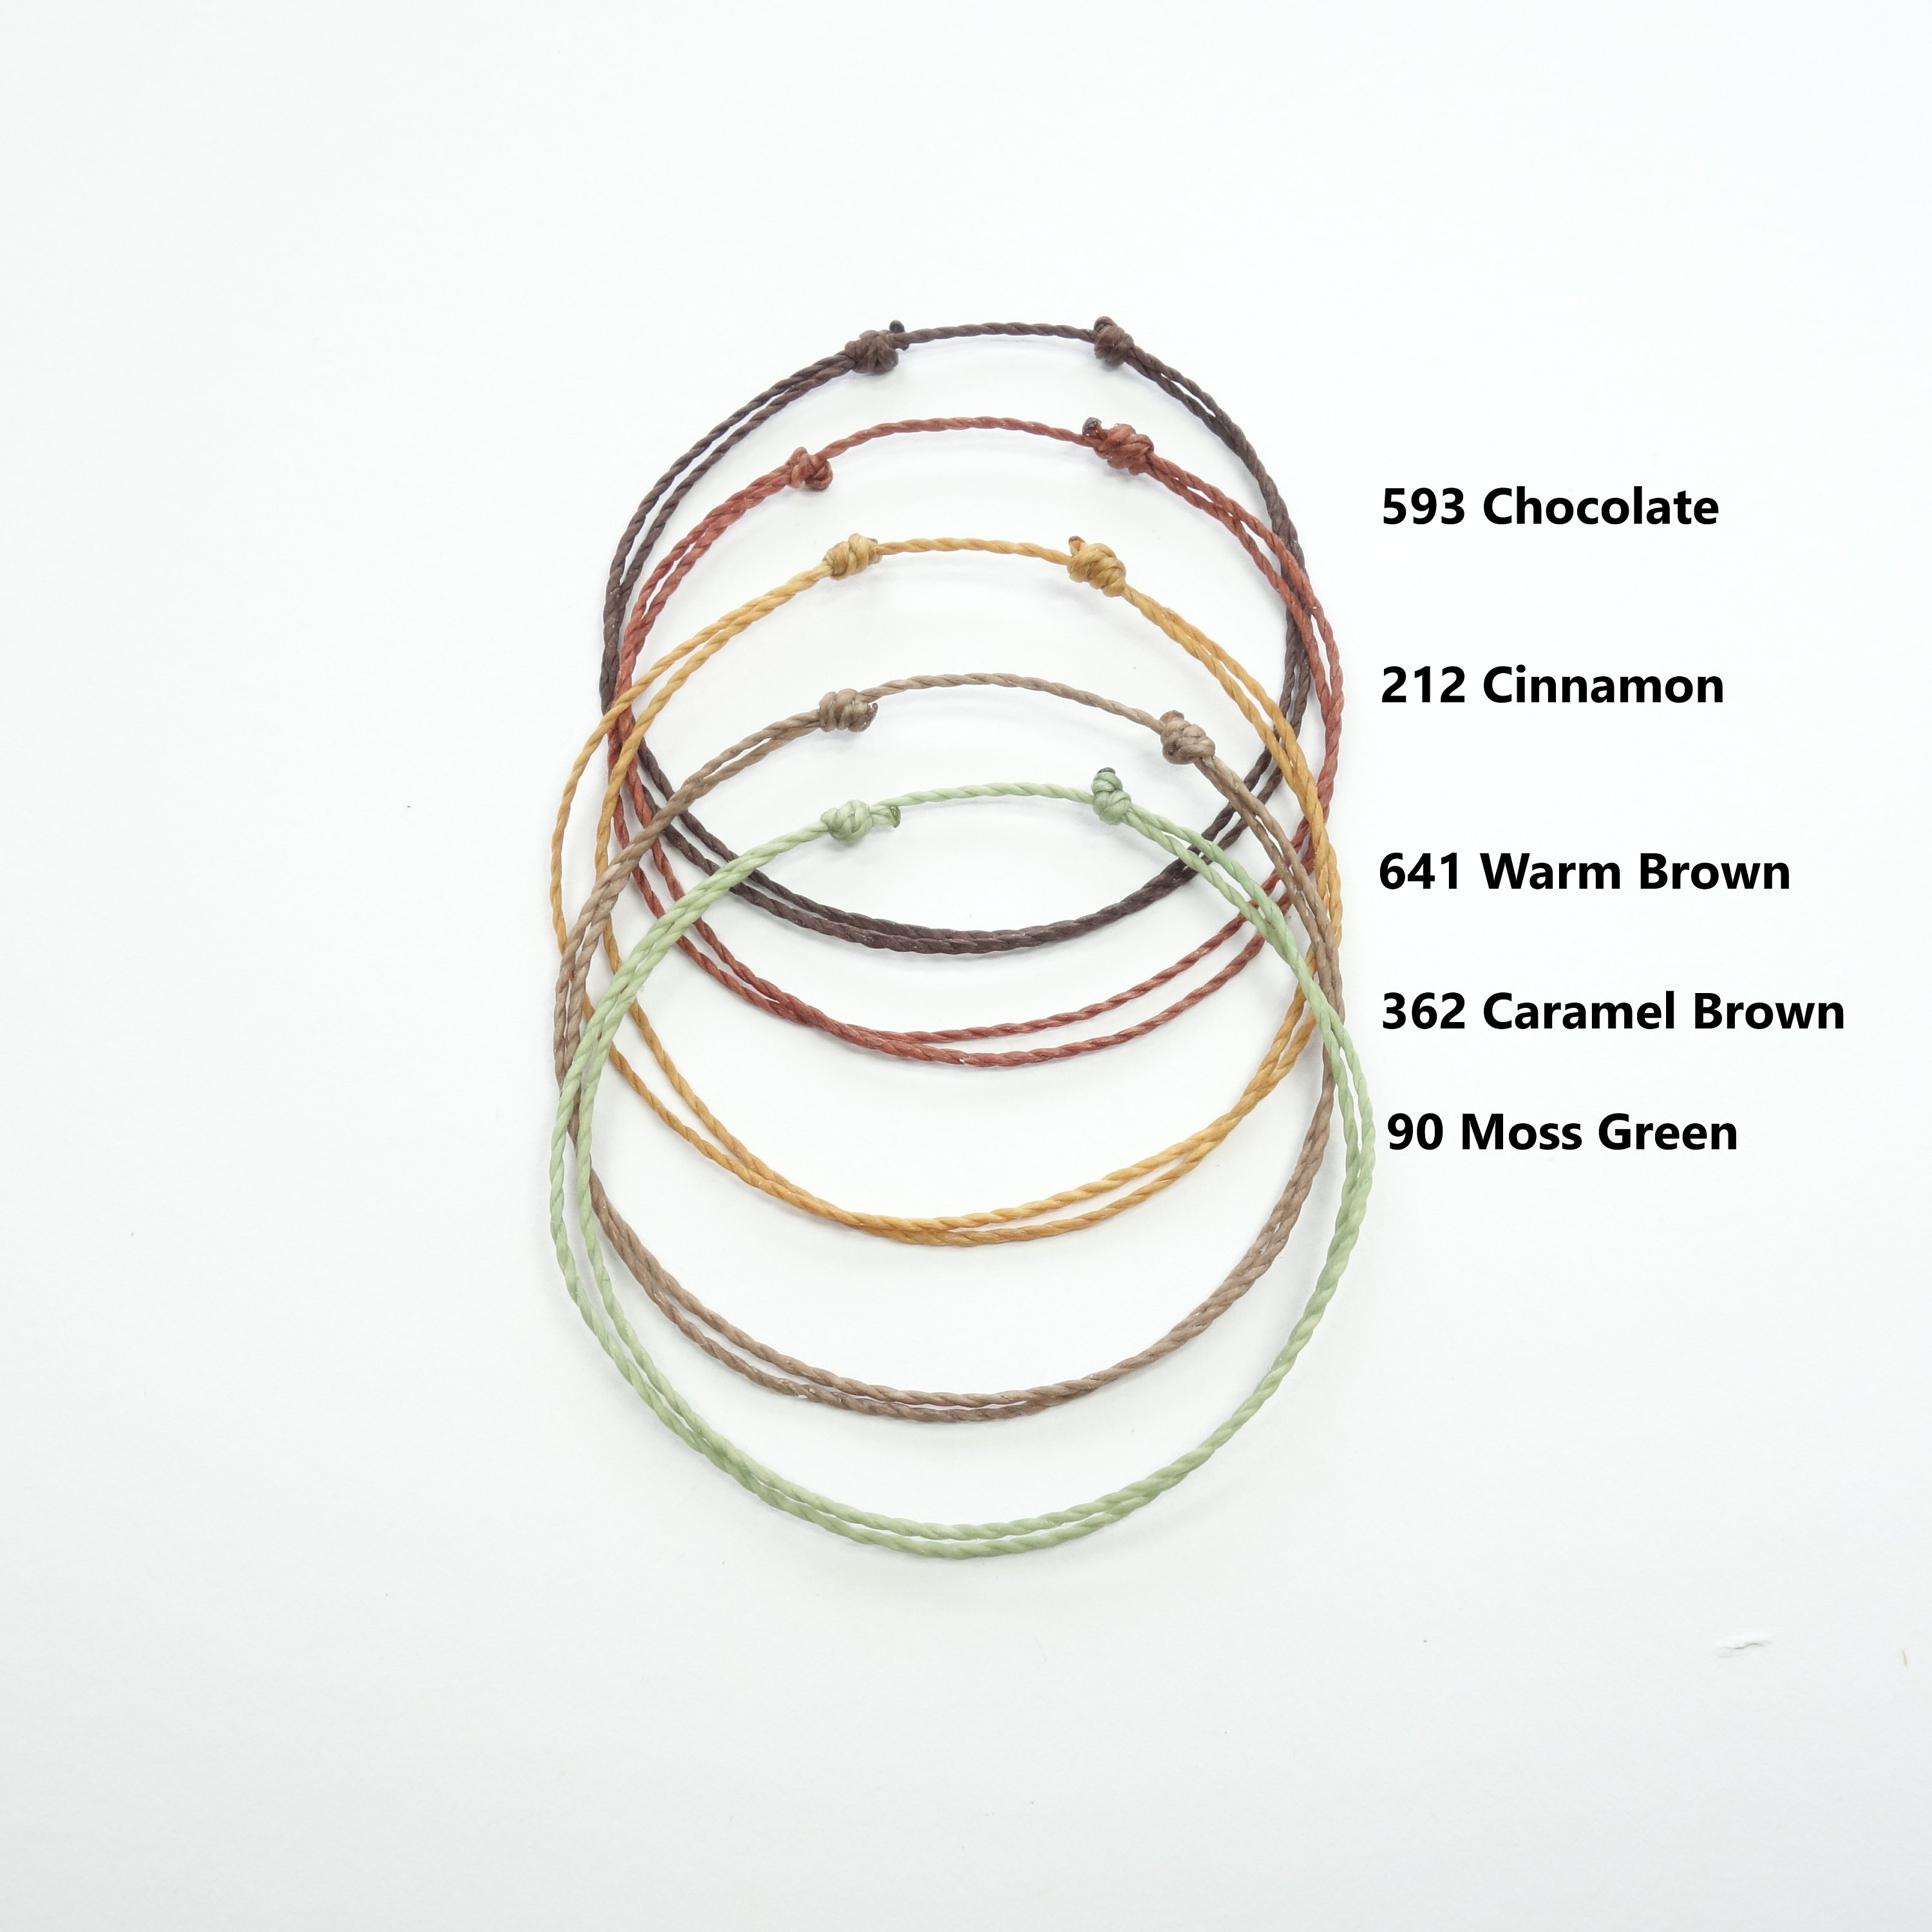 Handmade Wax Thread Woved Bracelets For Women Multilayer Woven Friendship  Bracelet String Bracelets Multicolour Adjustable Rope Hand Chain Bangle  From Vecuteboutique, $0.47